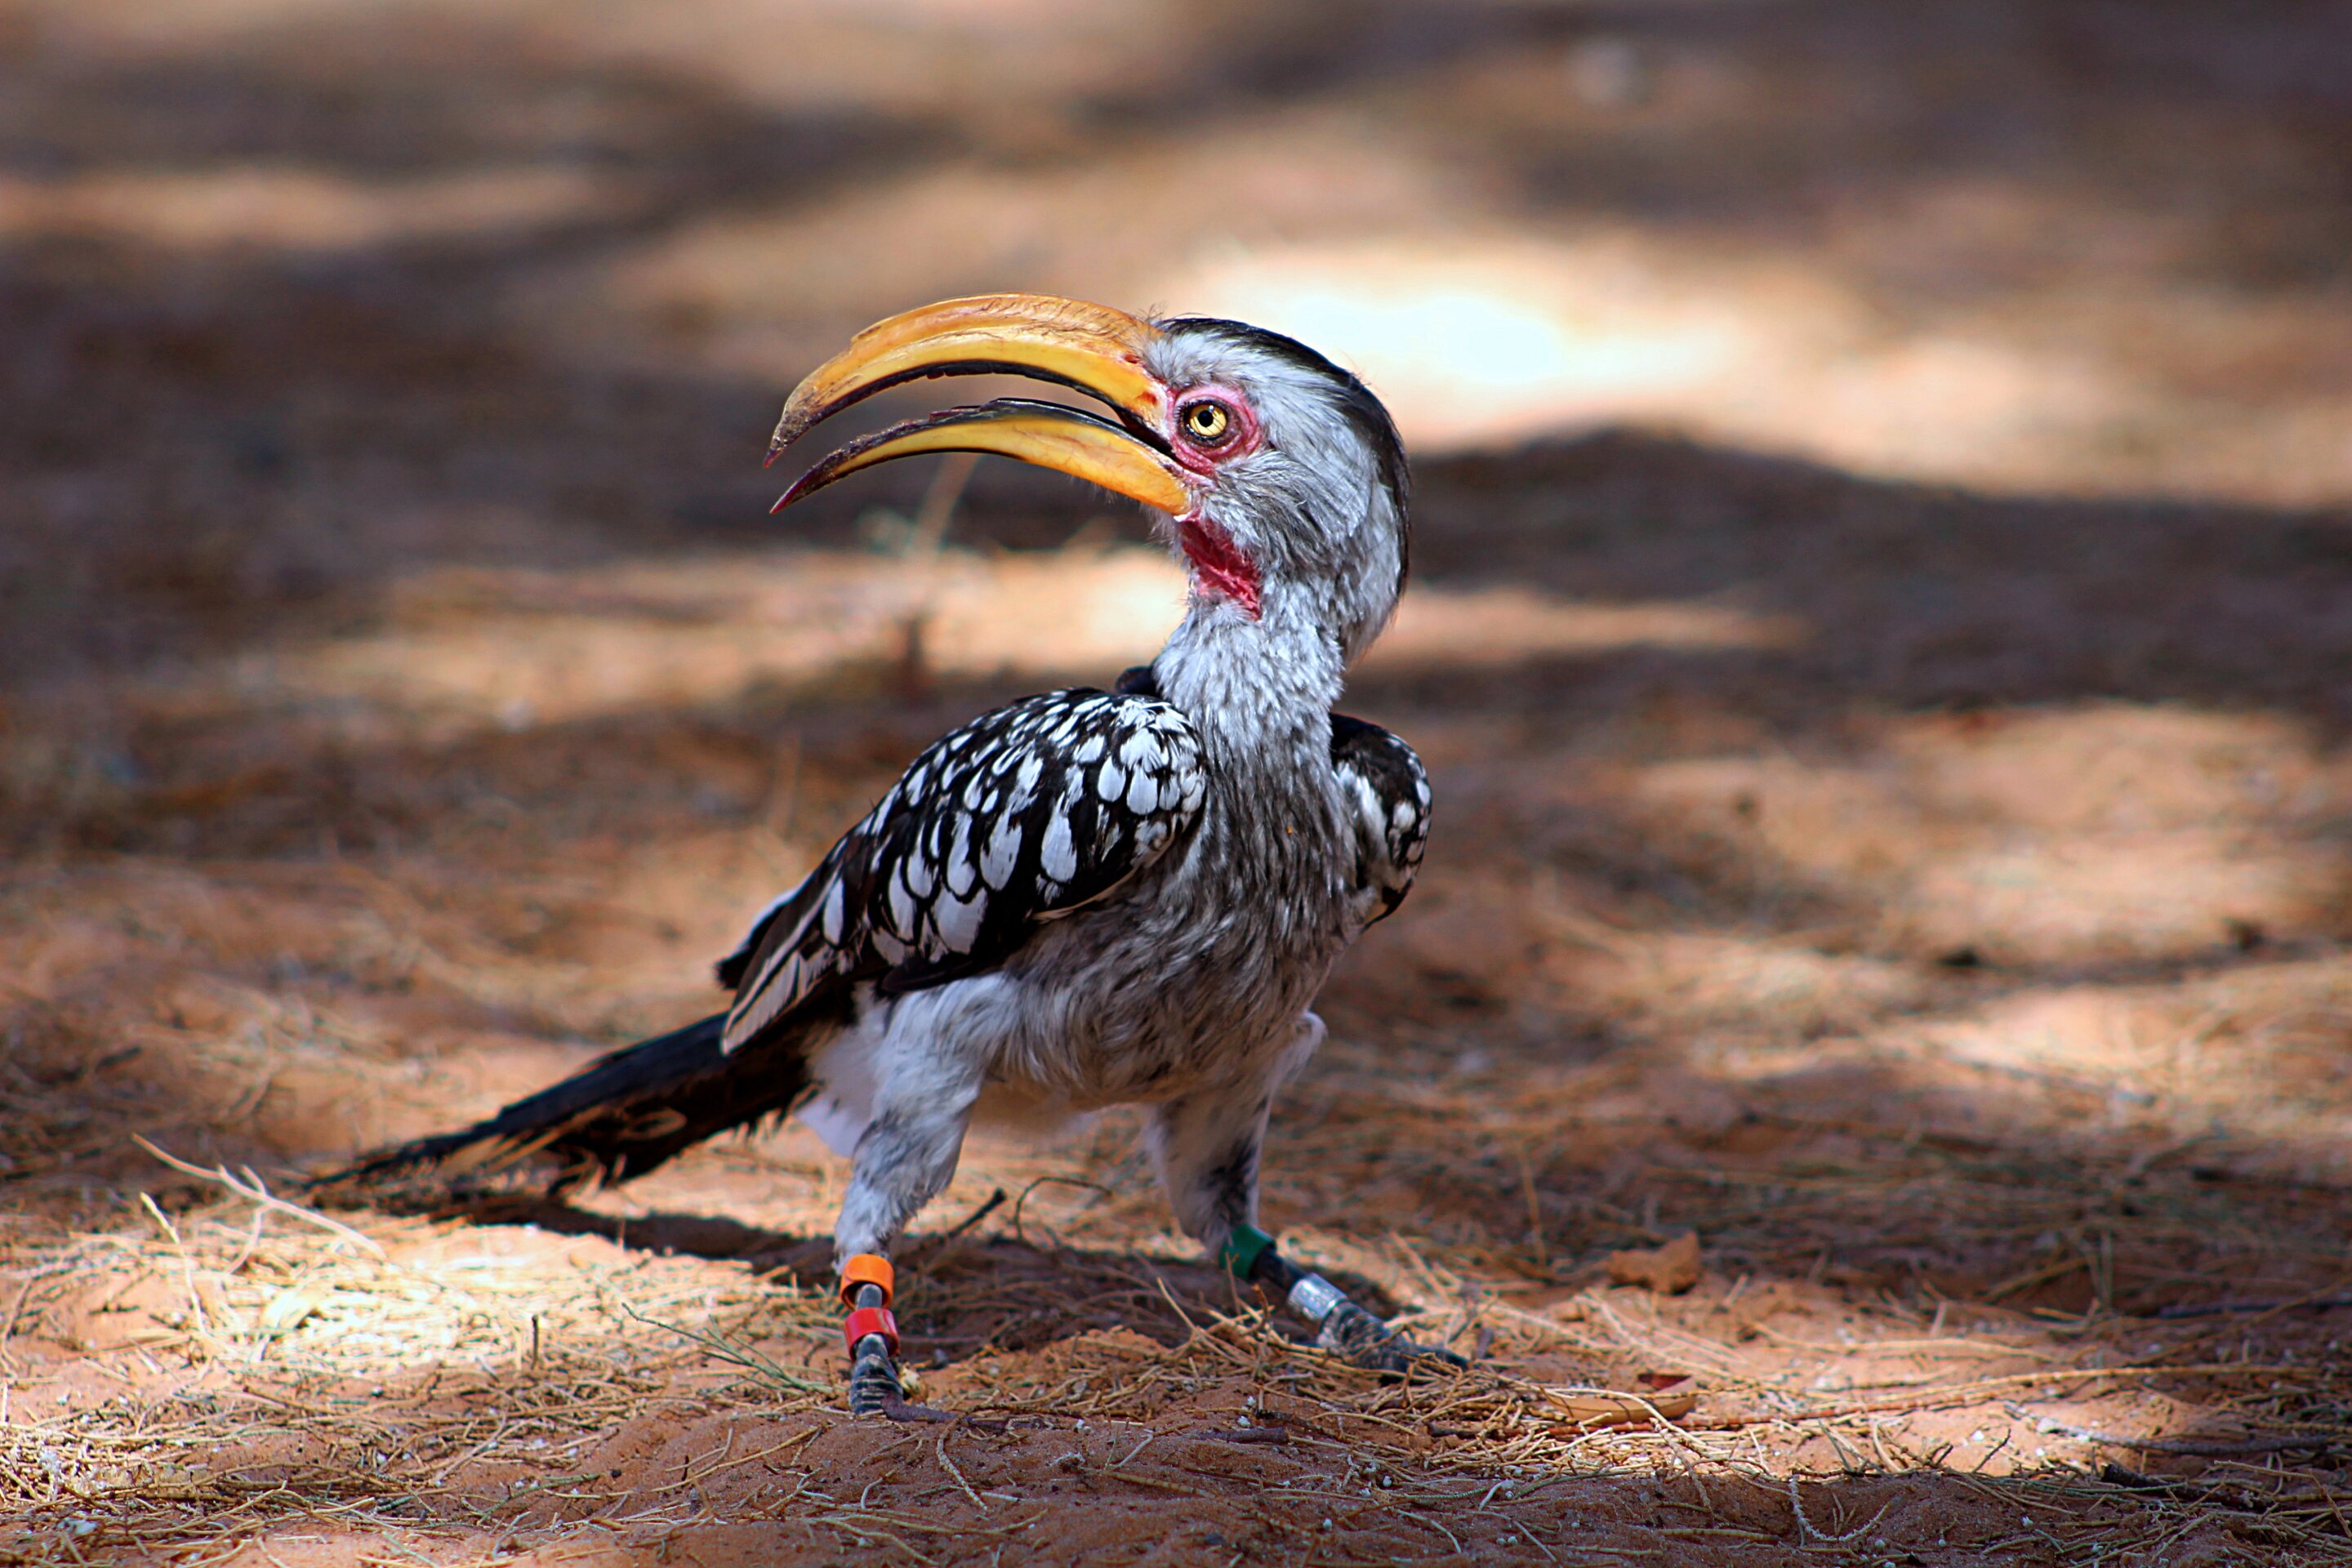 Climate crisis is driving yellow-billed hornbill to local extinction